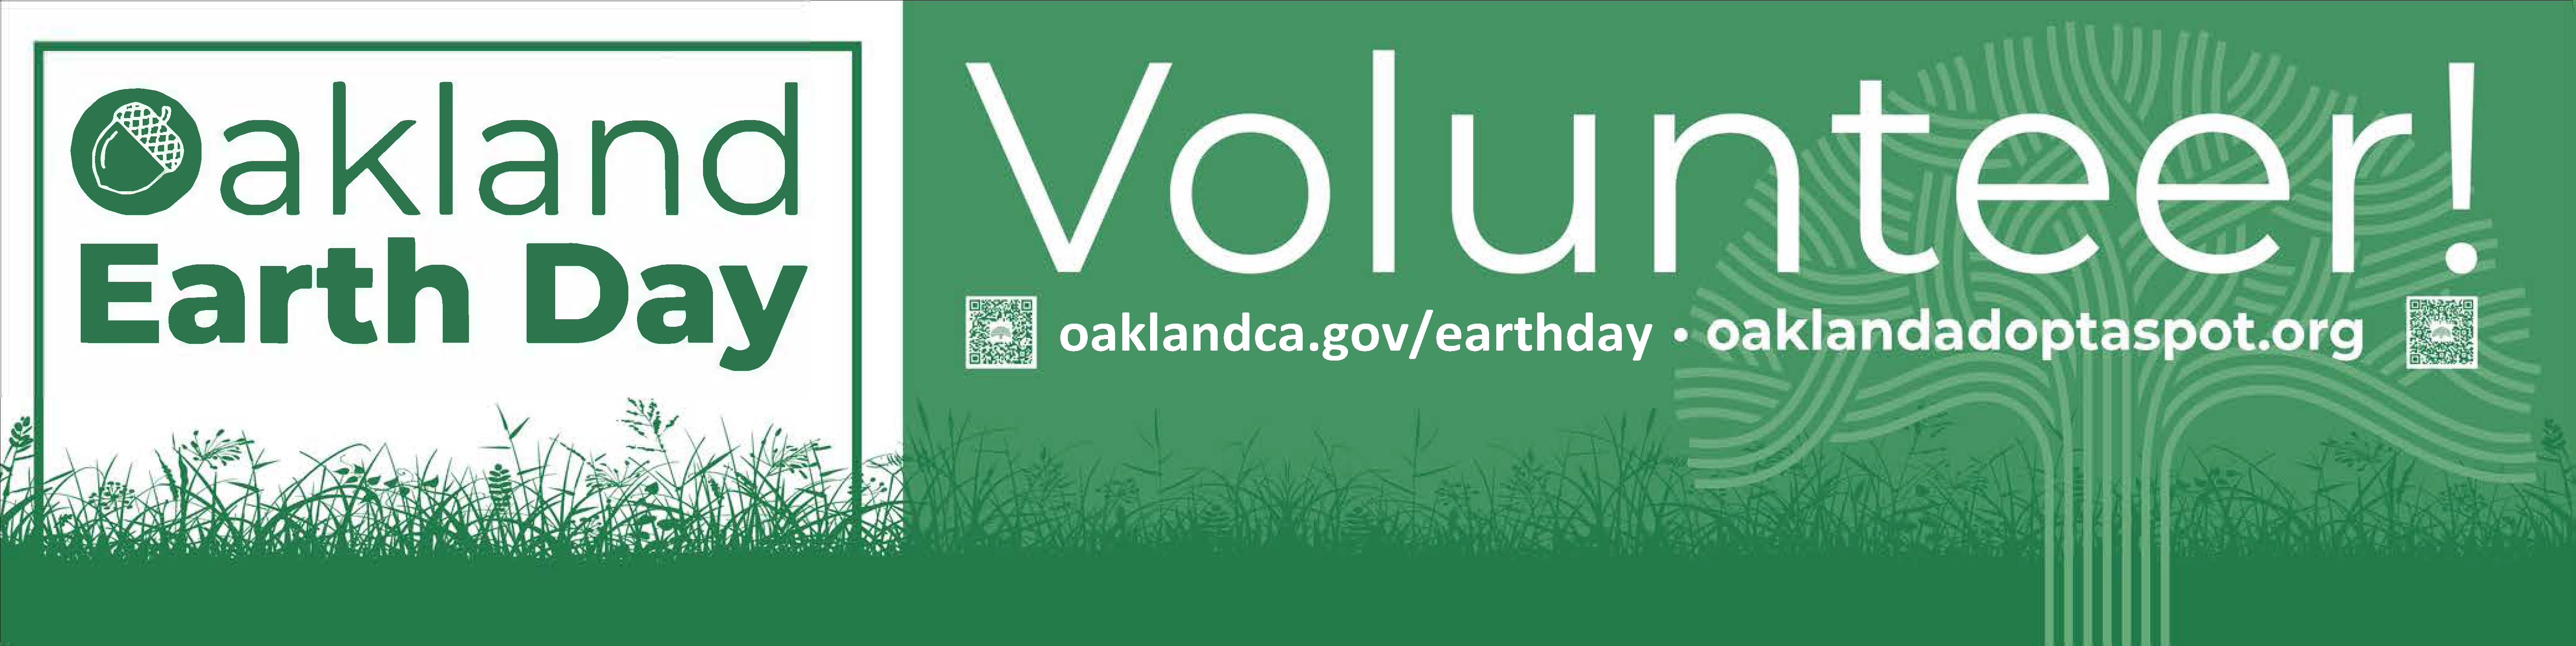 Oakland Earth Day Banner